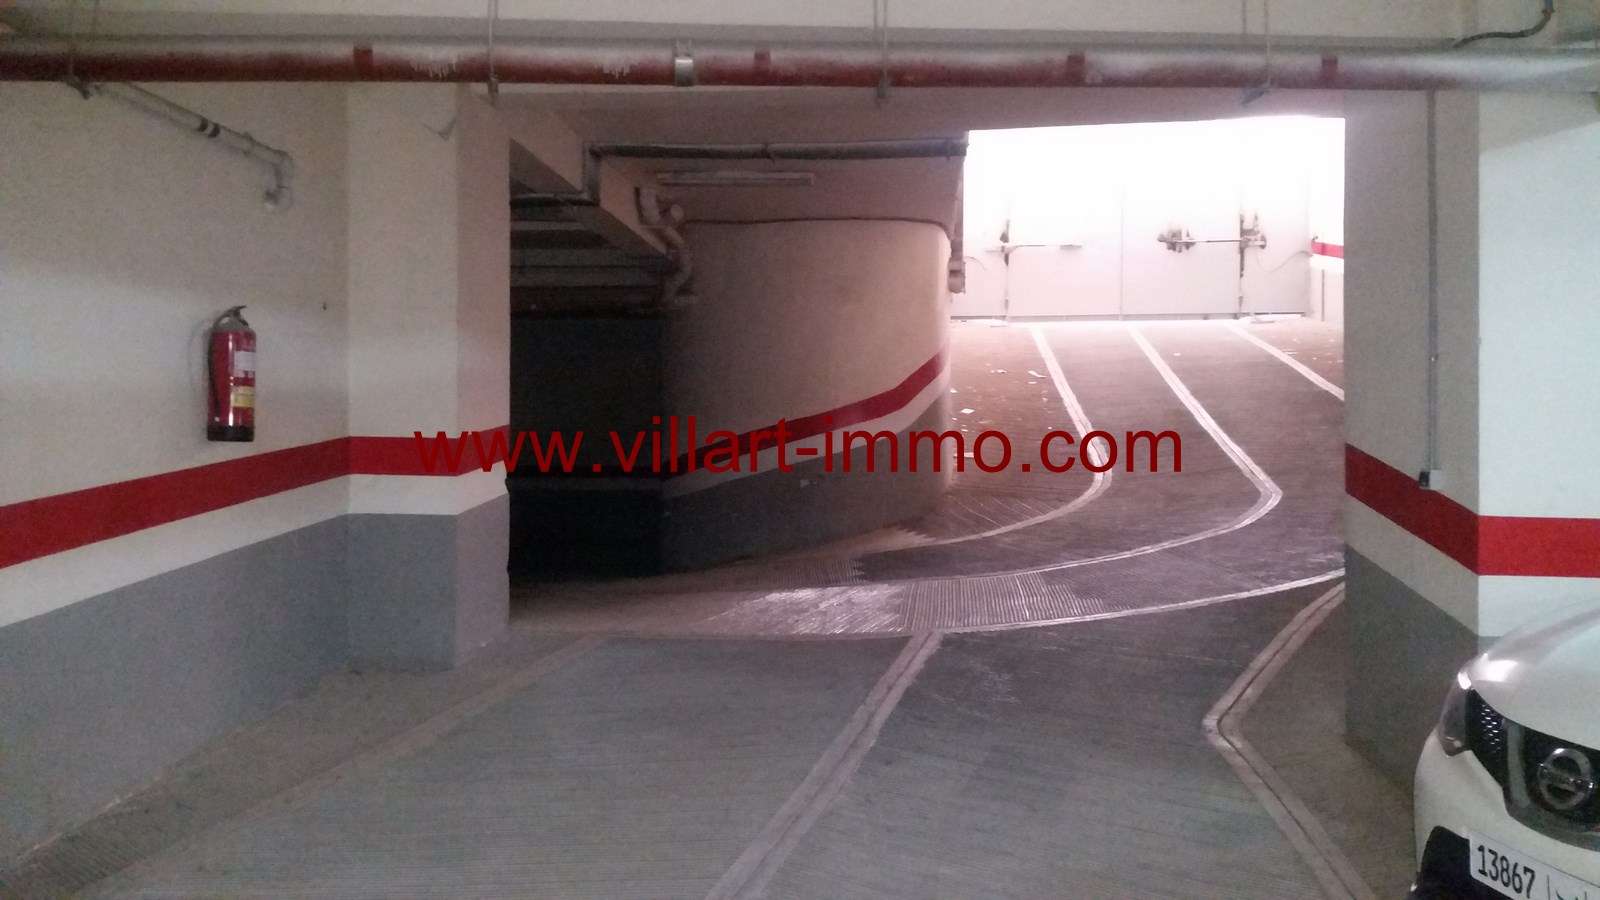 4-a-vendre-tager-place-de-parking-4-anejma-vp423-villart-immo-agence-immobiliere